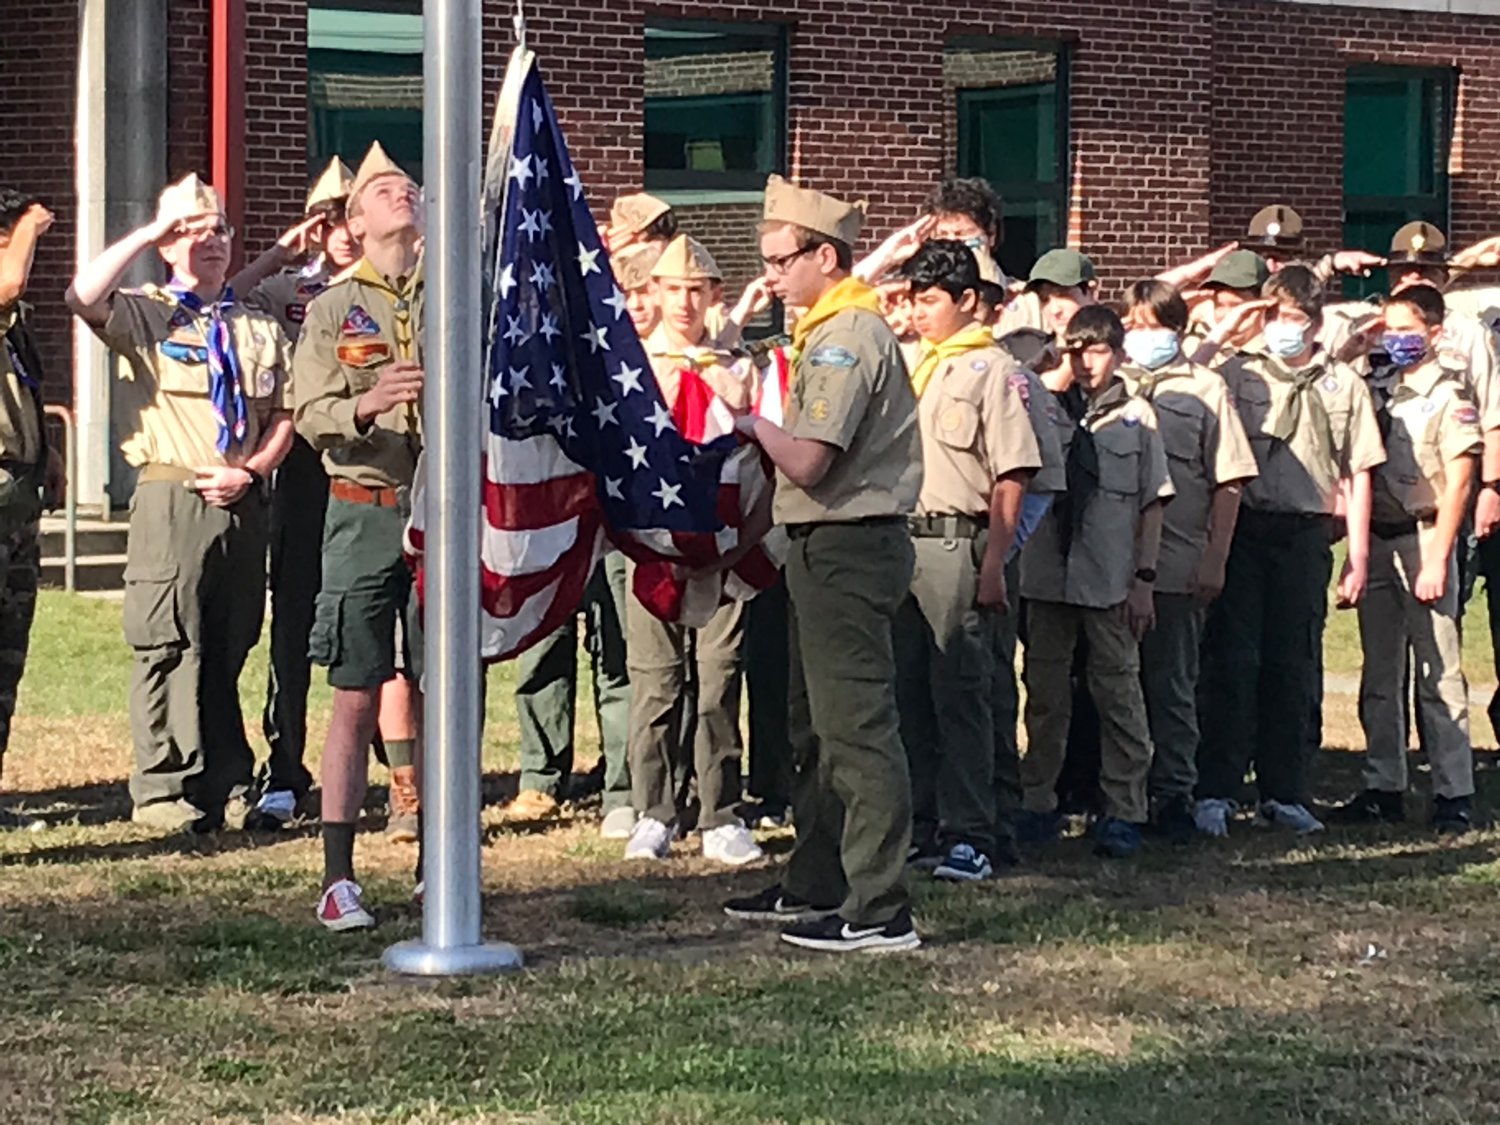 A group of Boy Scouts raise the American flag during last year's Veterans Day ceremony outside Barrington High School.